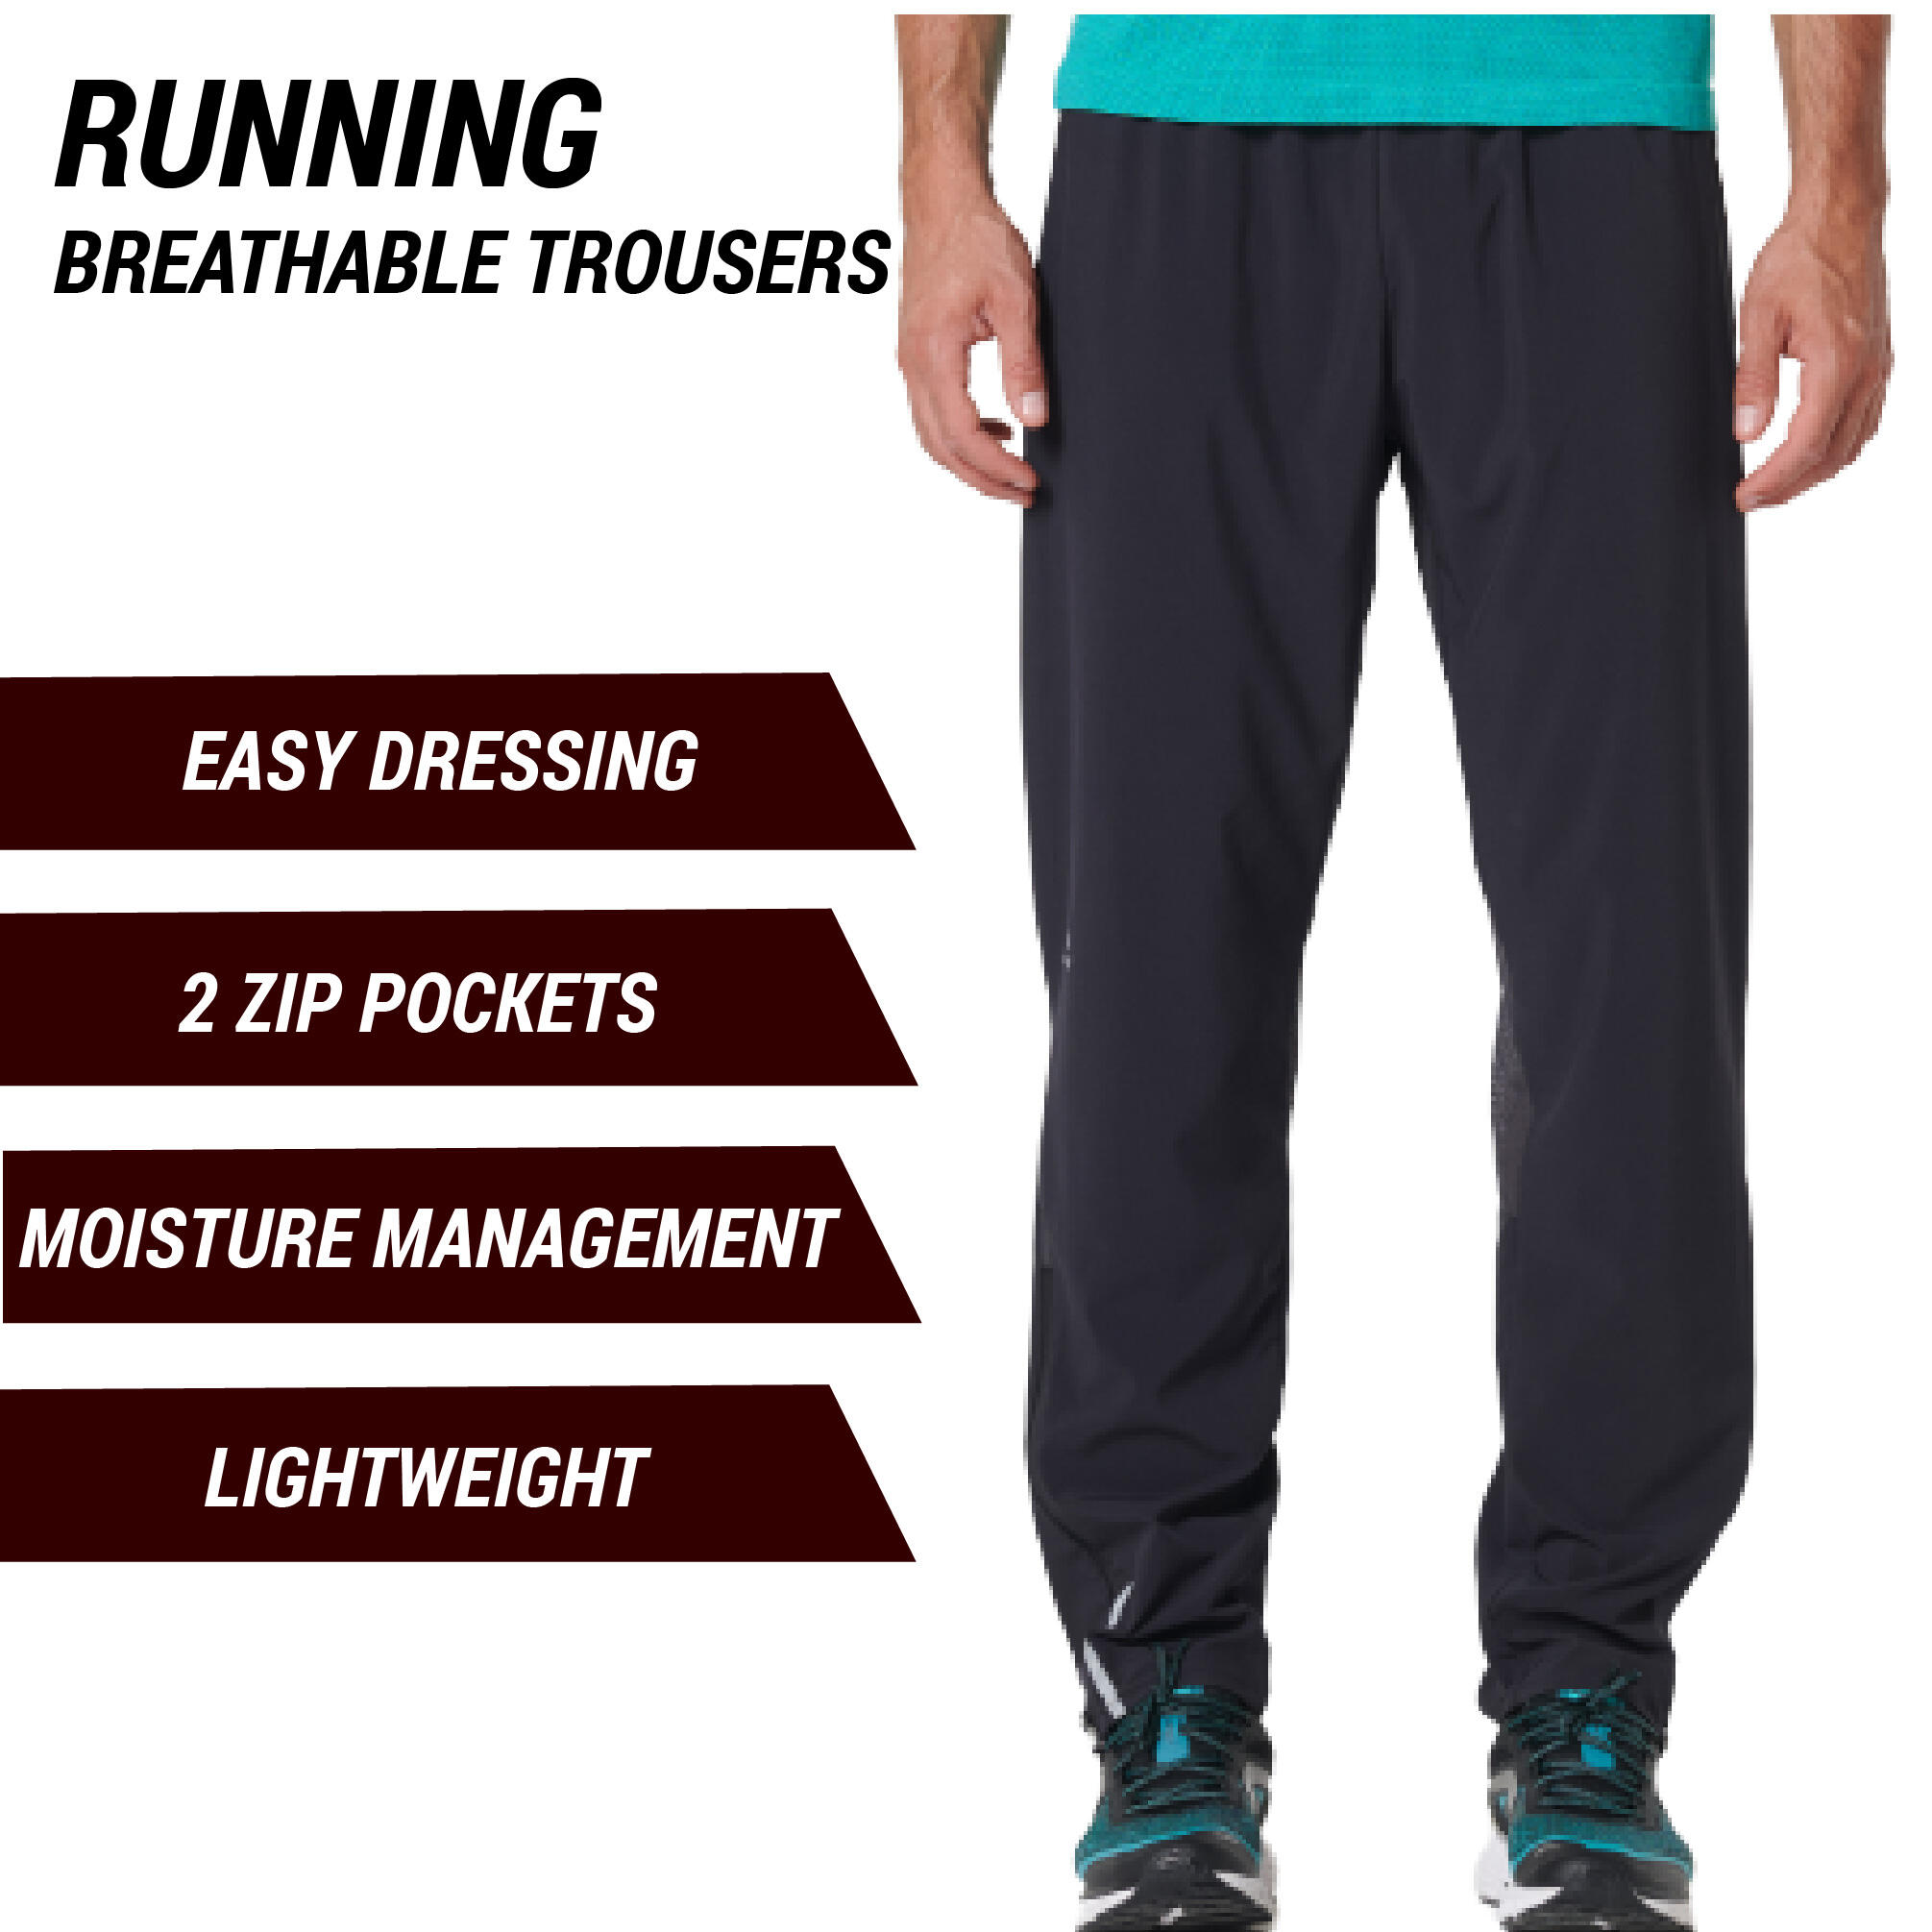 Decathlon Sports India - **PRODUCT OF THE MONTH** LINK: https://www. decathlon.in/p/8484933/fitness-track-pants/men -s-regular-fit-rapid-dry-stretchable-fitness-pant-navy LINK: https://www. decathlon.in/p/8326403/fitness-tracksuits/men-s-basic-fitness ...